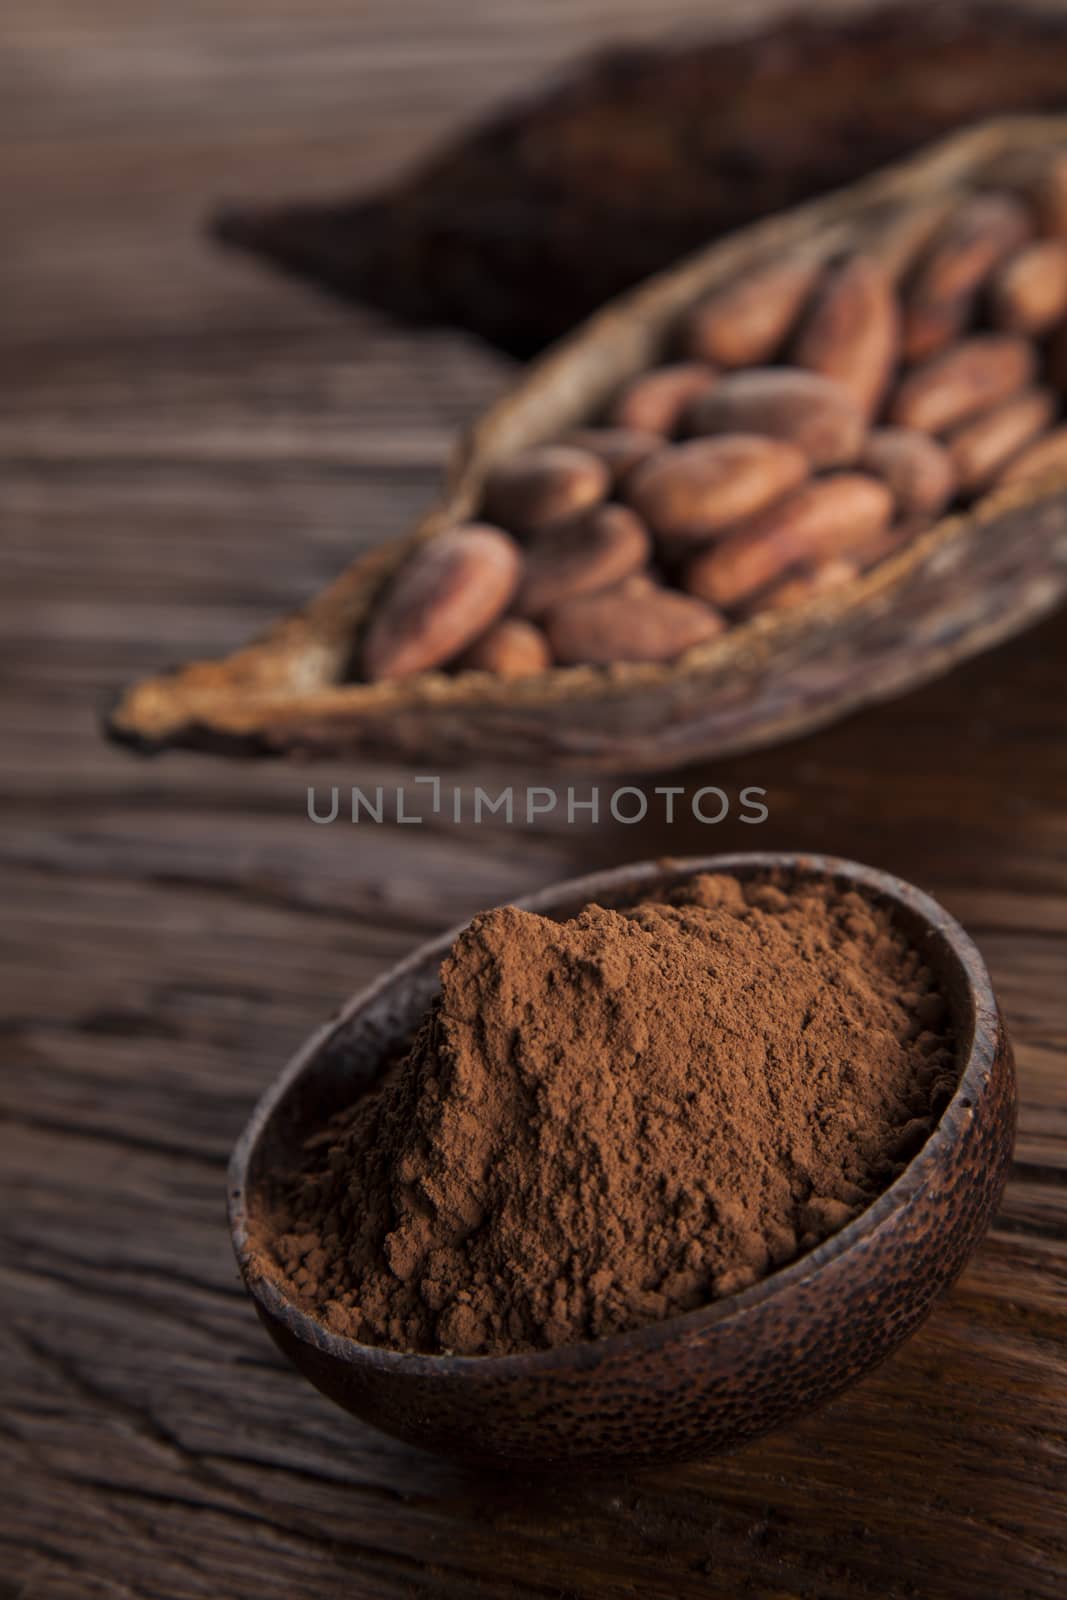 Cacao beans and powder and food dessert background by JanPietruszka